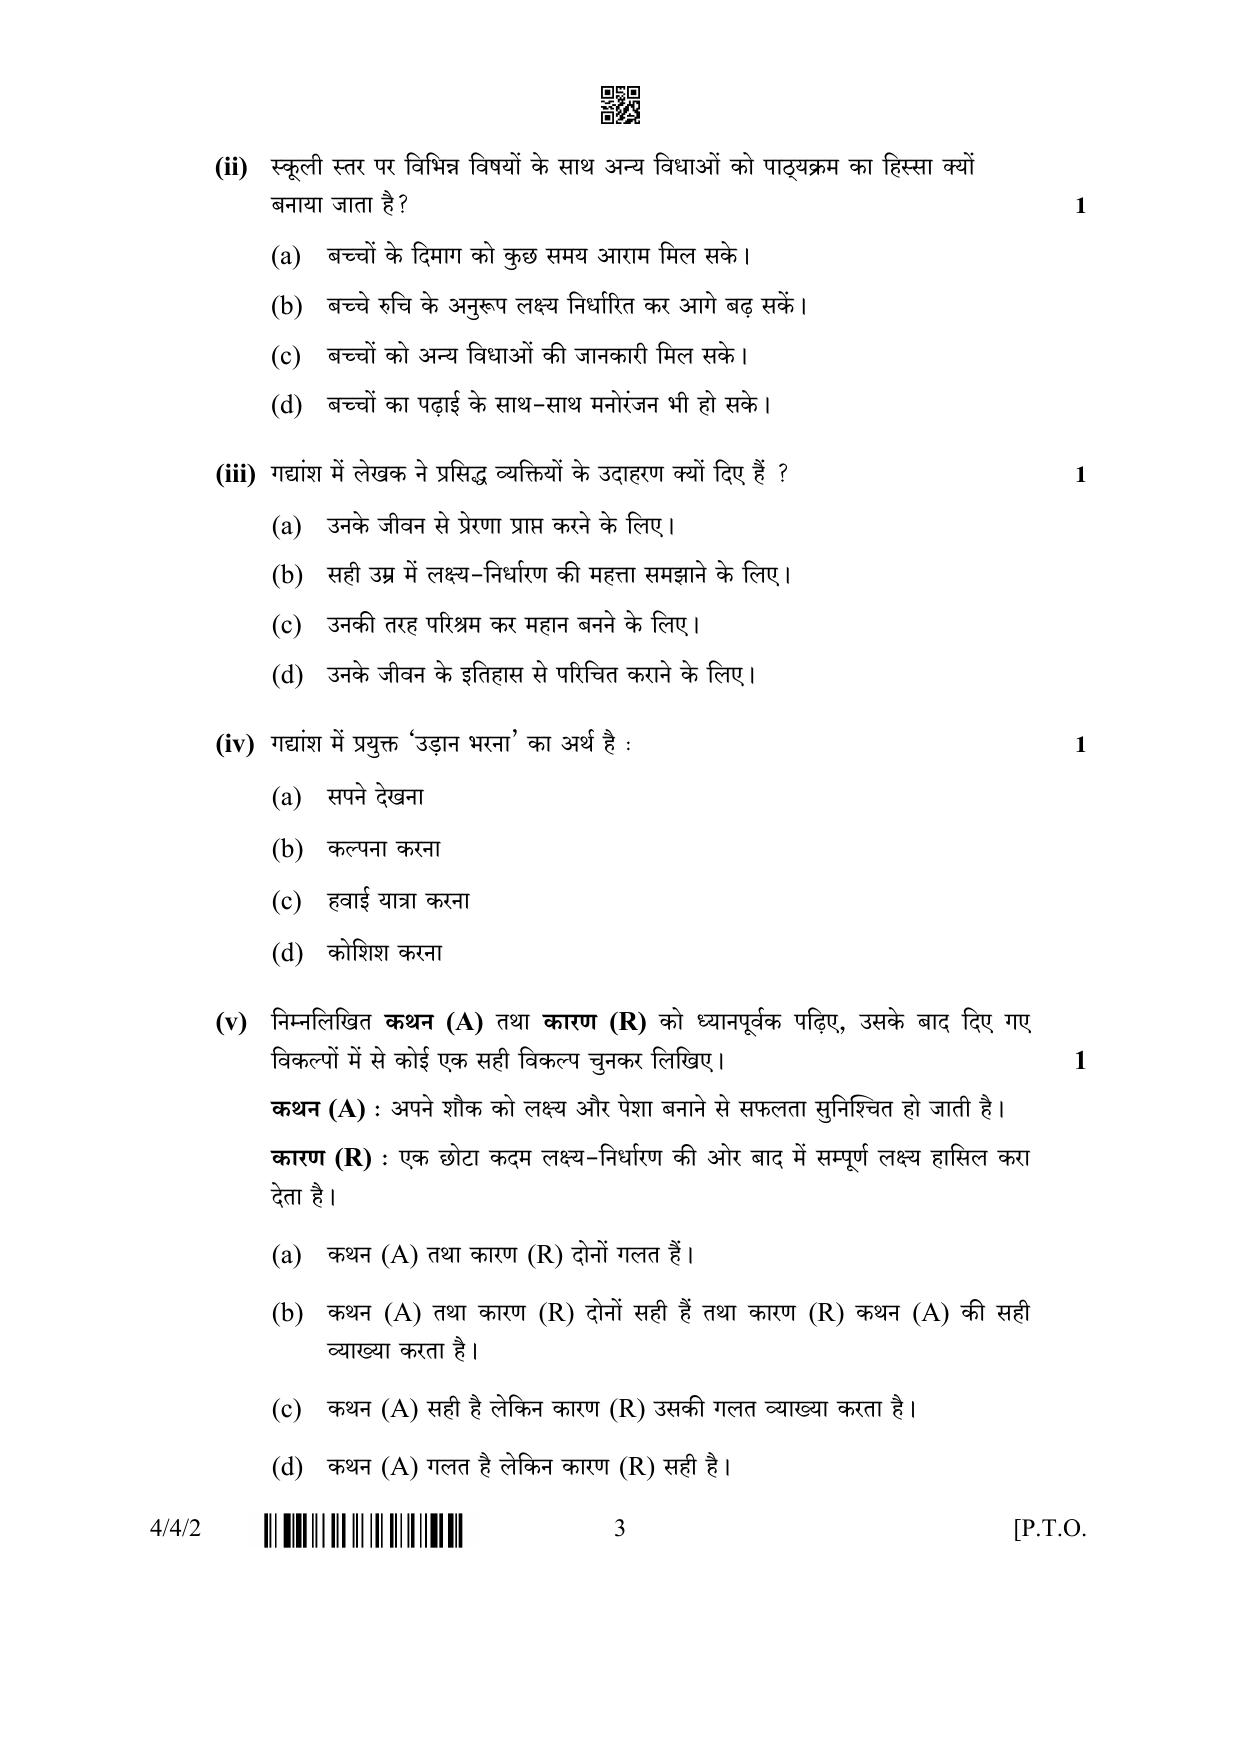 CBSE Class 10 4-4-2 Hindi B 2023 Question Paper - Page 3